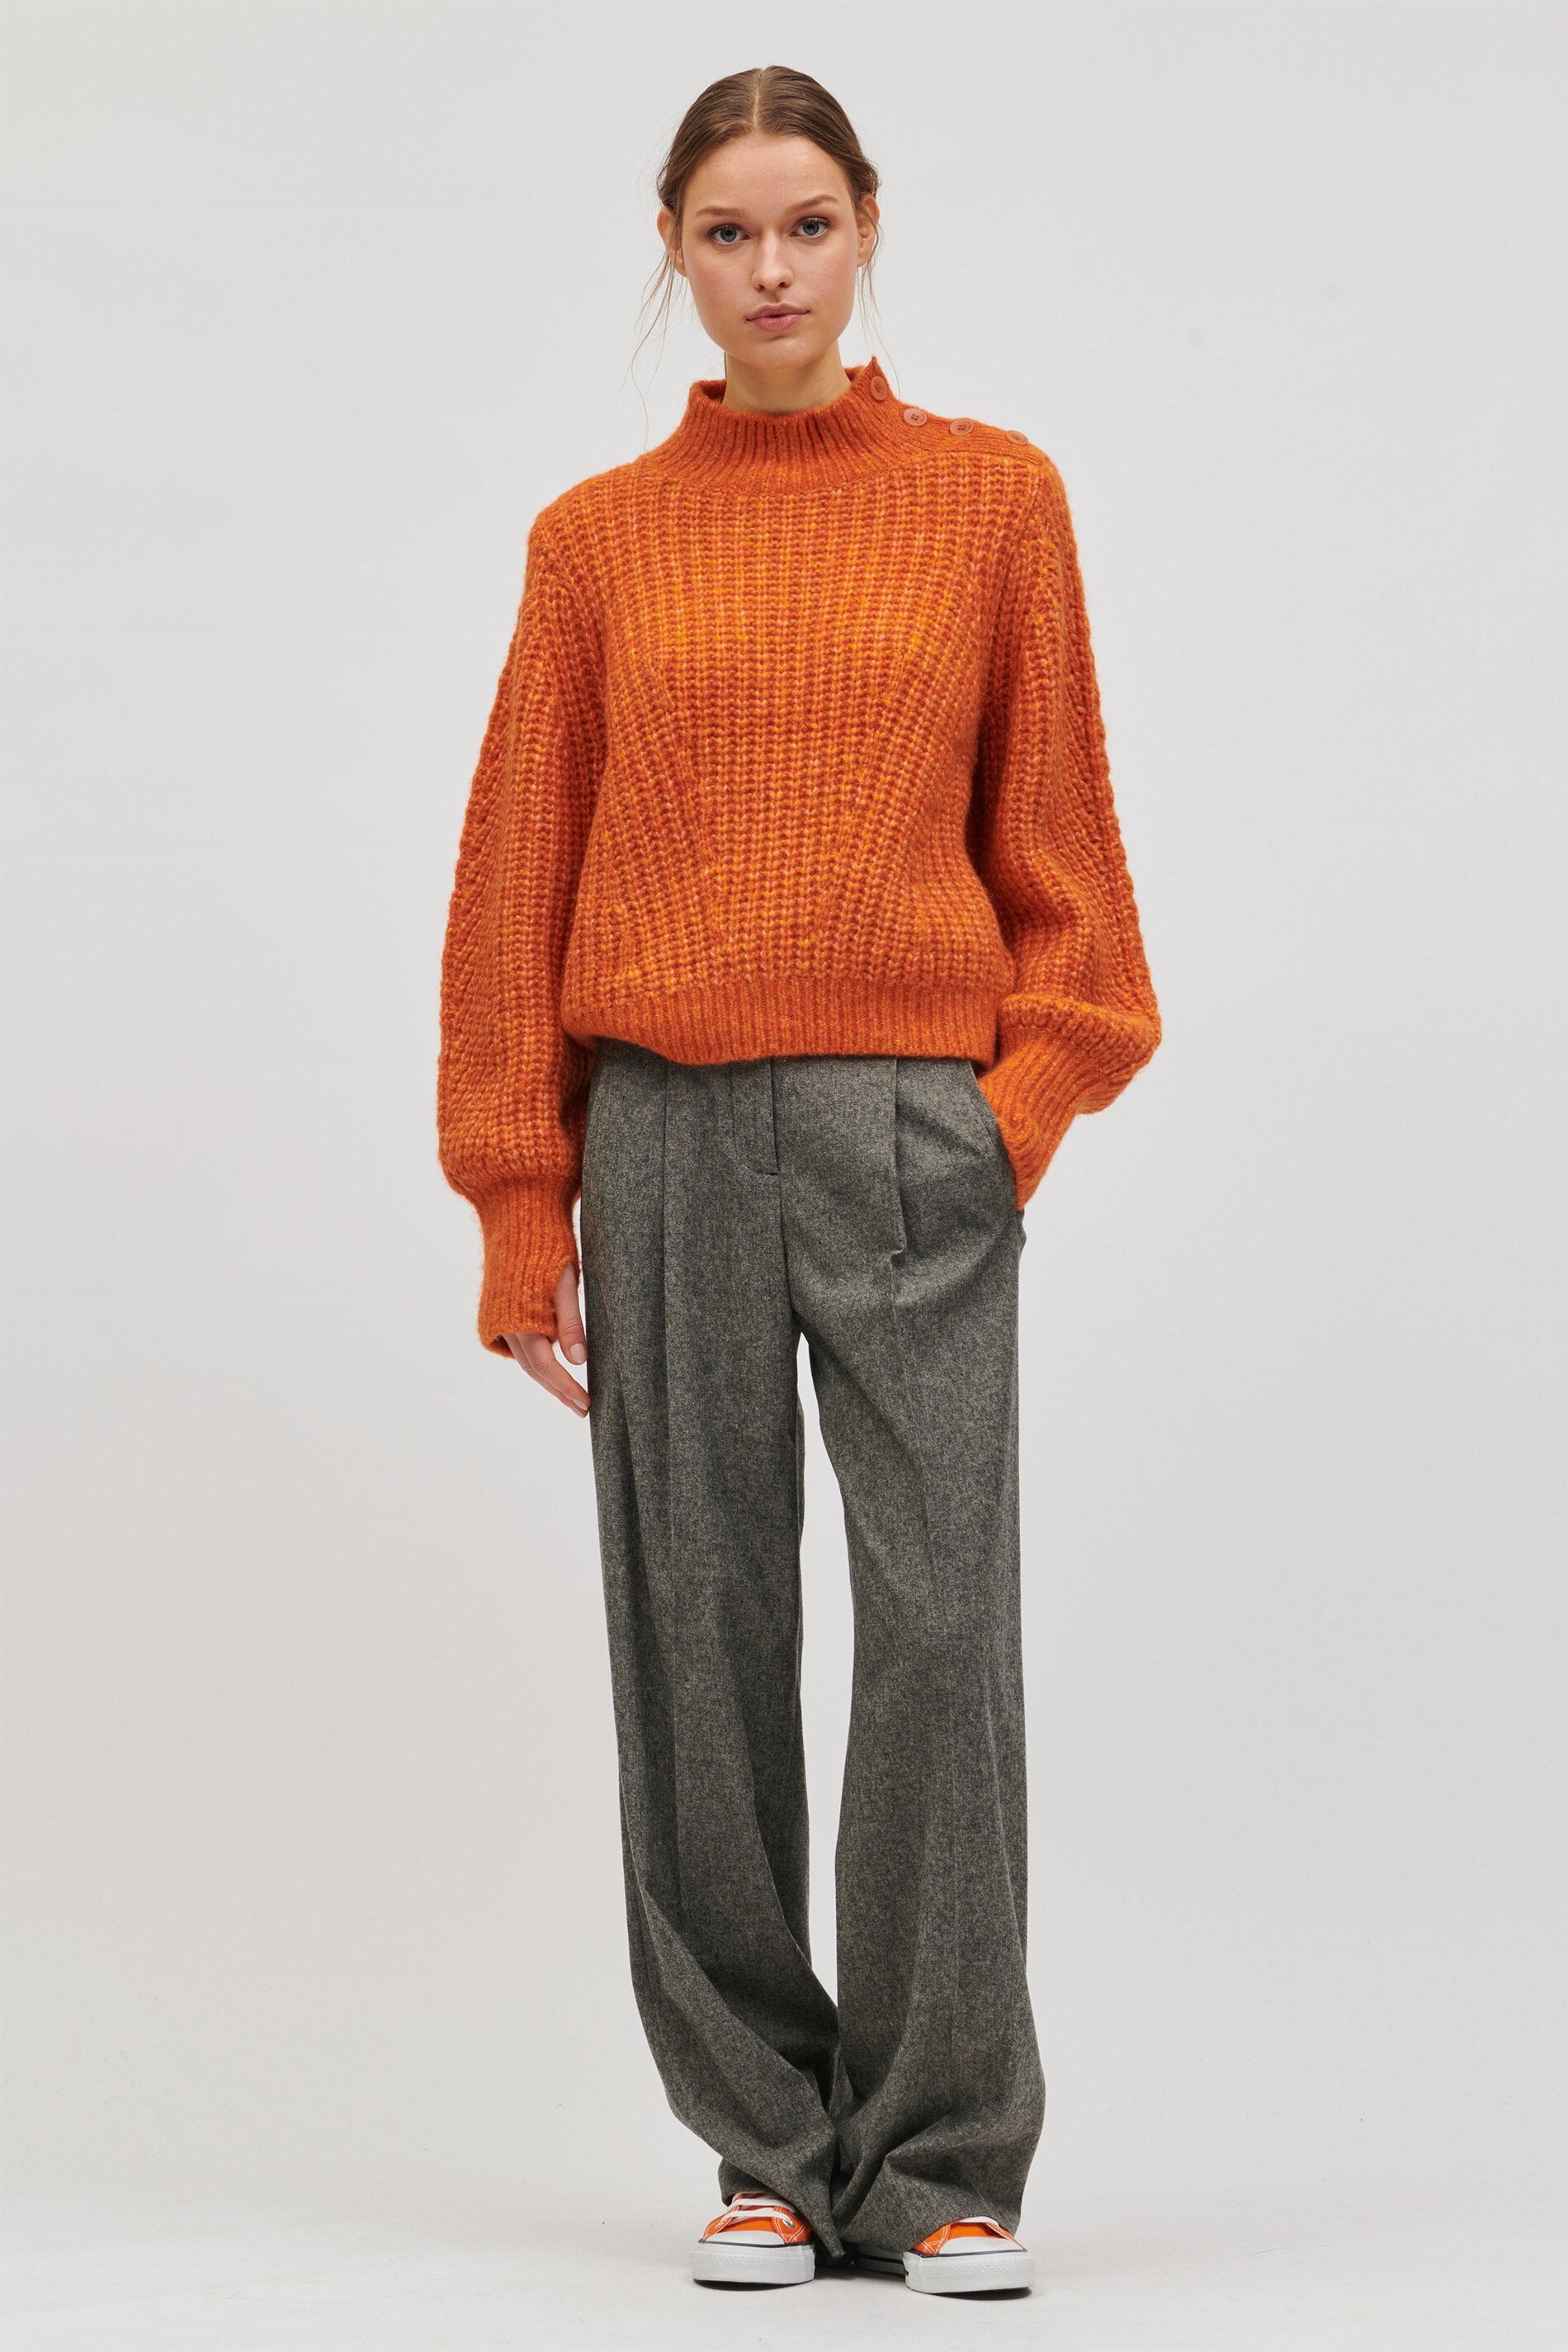 LUISA CERANO-OUTLET-SALE-Ripp-Pullover aus Woll-Mix-Strick-by-ARCHIVIST